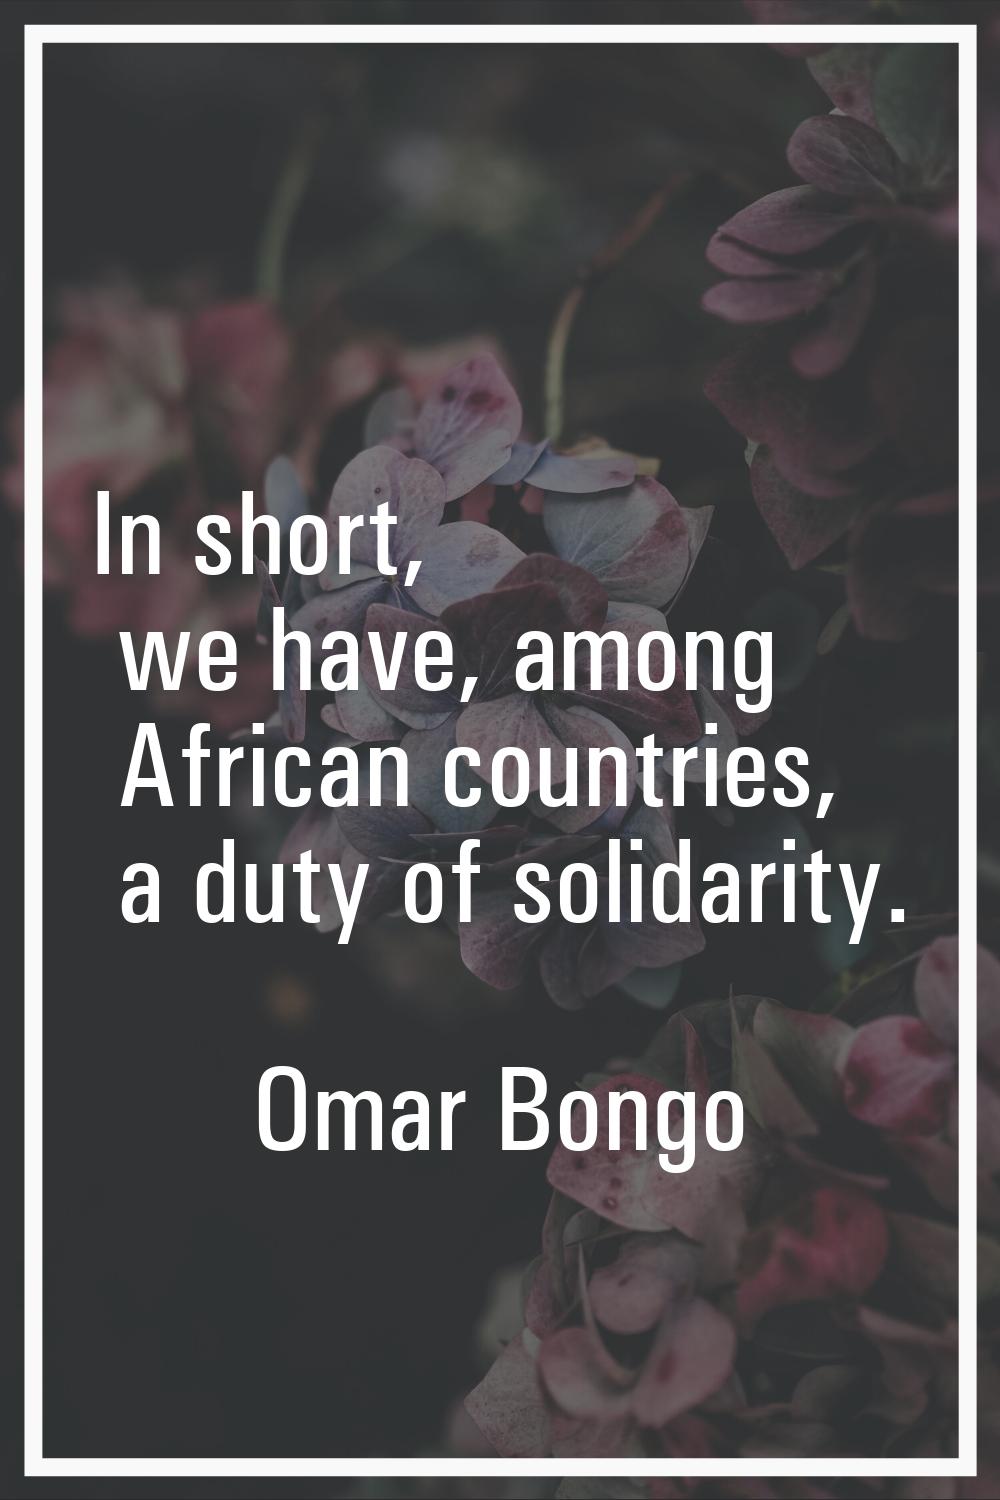 In short, we have, among African countries, a duty of solidarity.